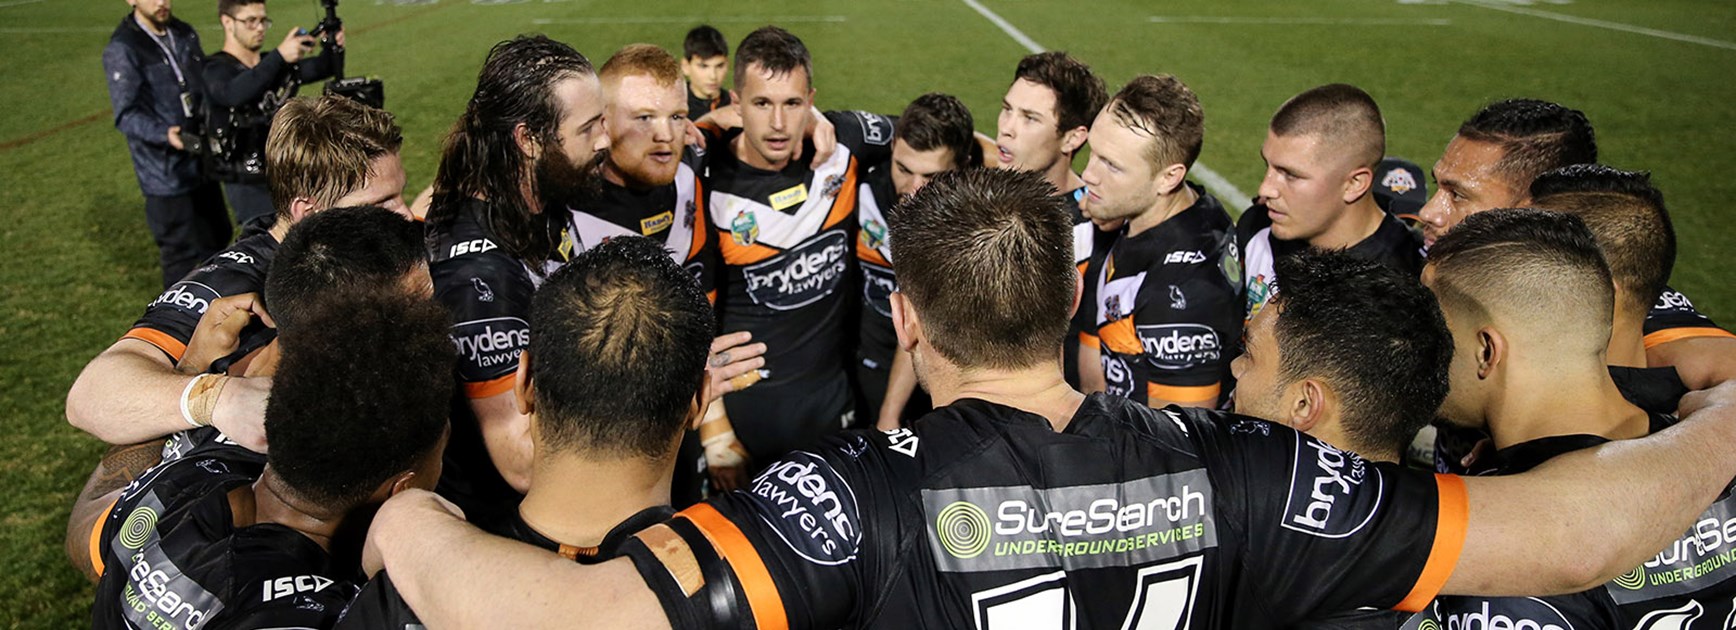 Wests Tigers huddle after upsetting the Cowboys at Leichhardt Oval.